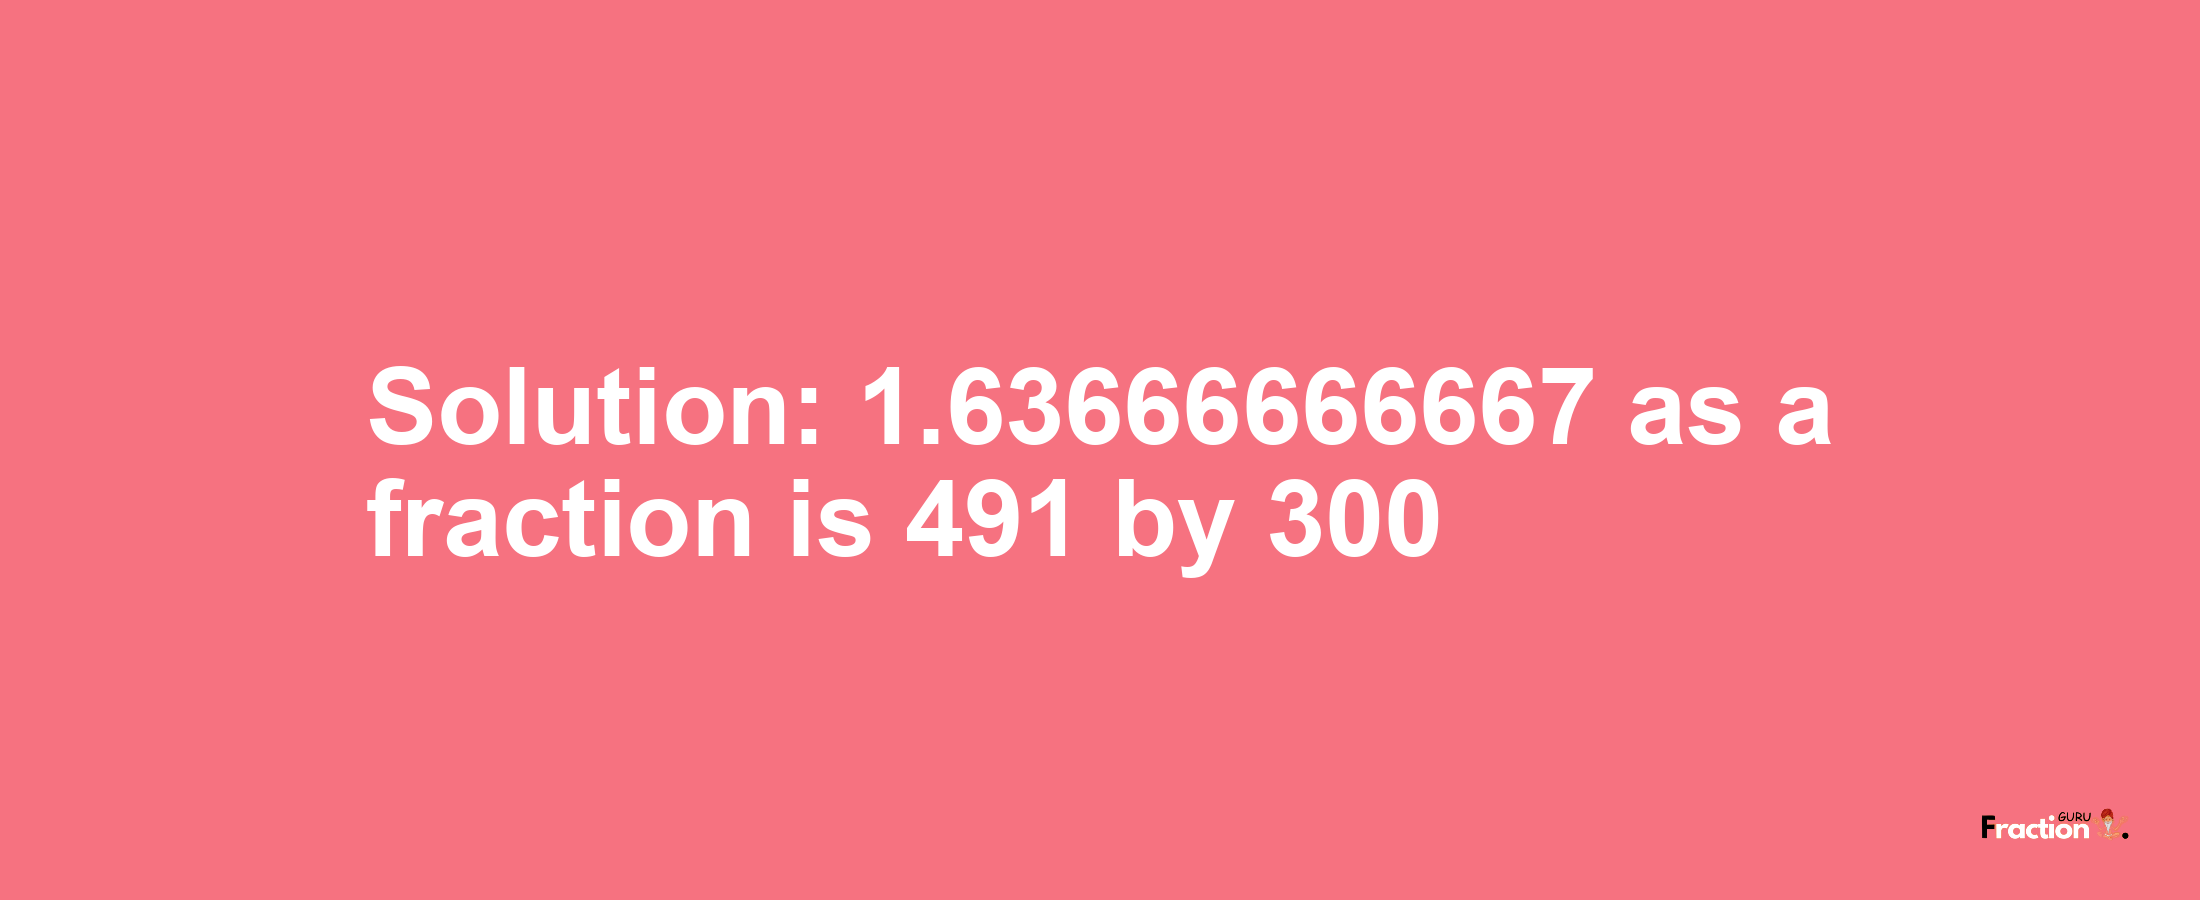 Solution:1.63666666667 as a fraction is 491/300